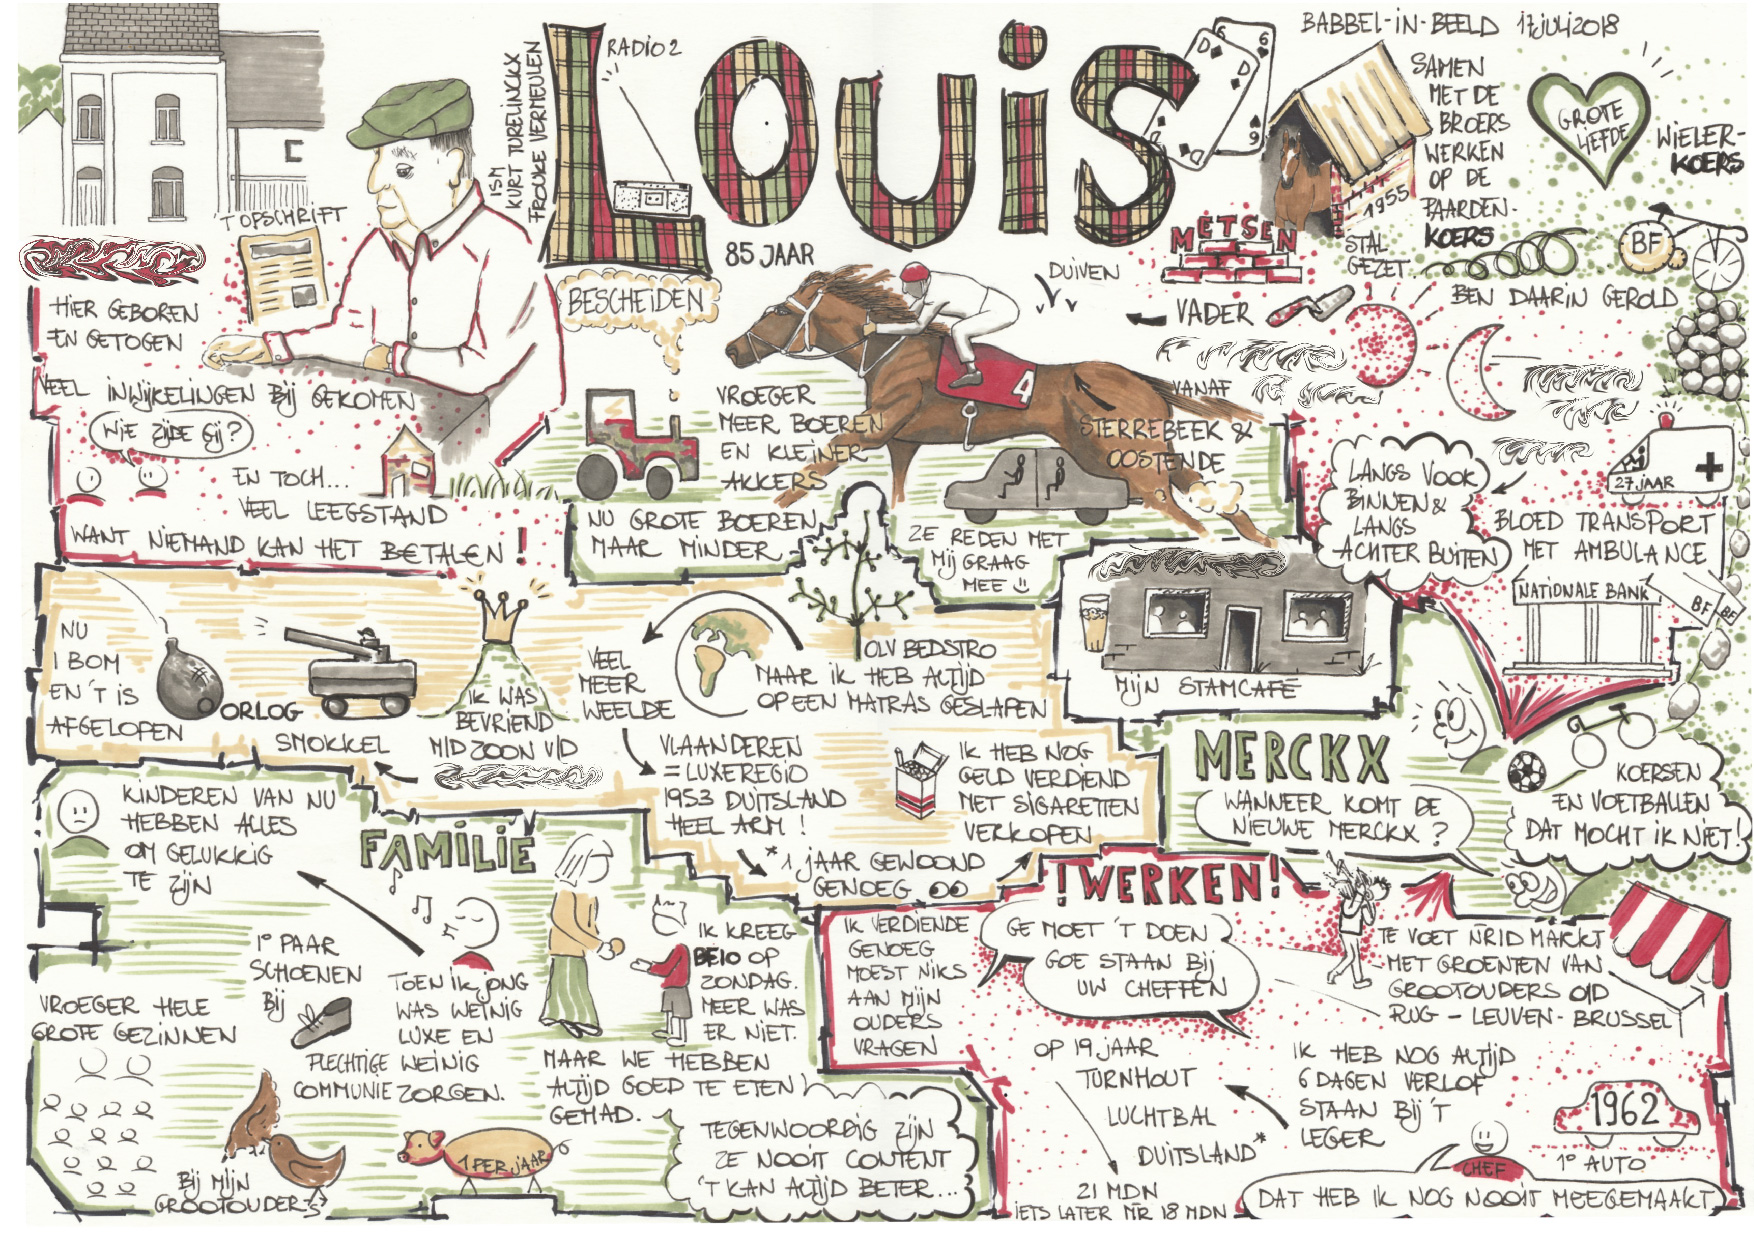 Life Story Drawing of Louis, an elder who loved seeing horse races